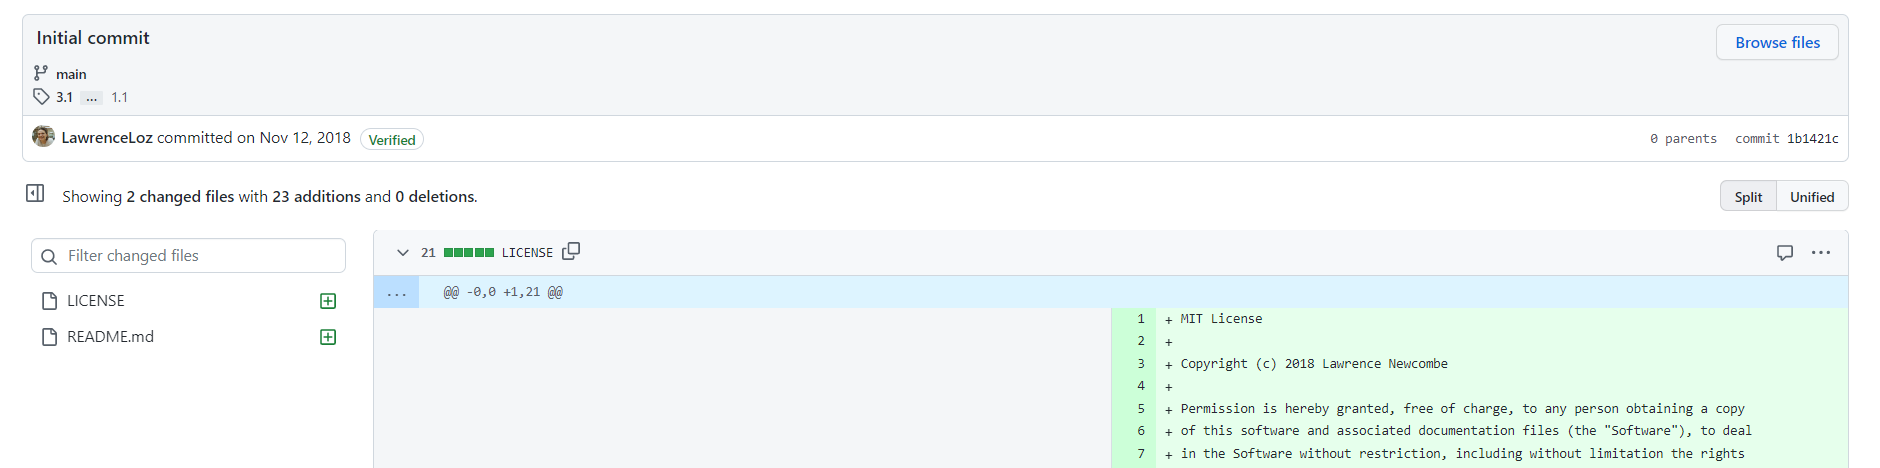 Github screenshot showing first commit